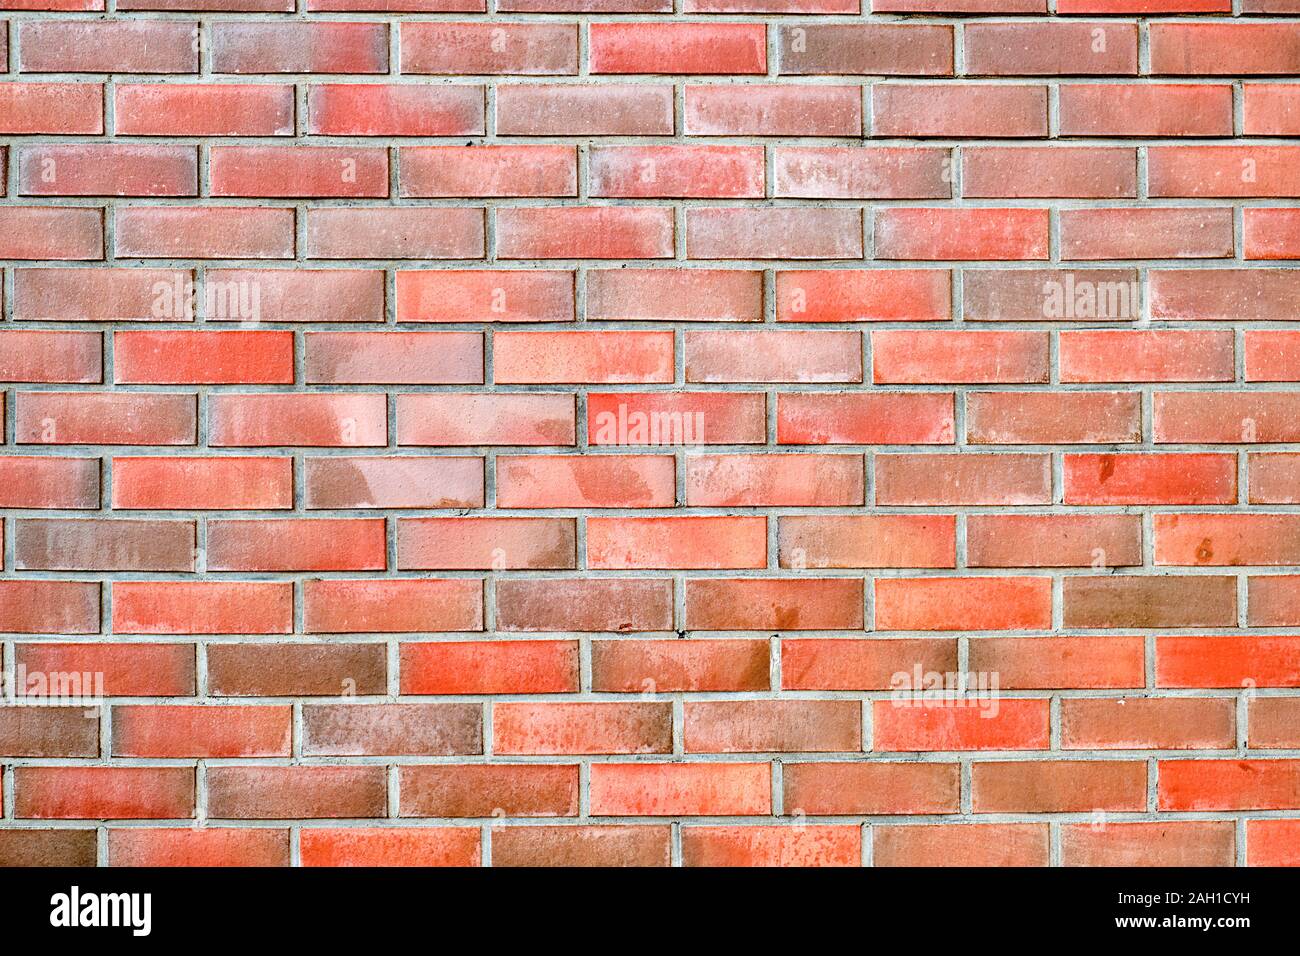 Background from a red brick wall Stock Photo